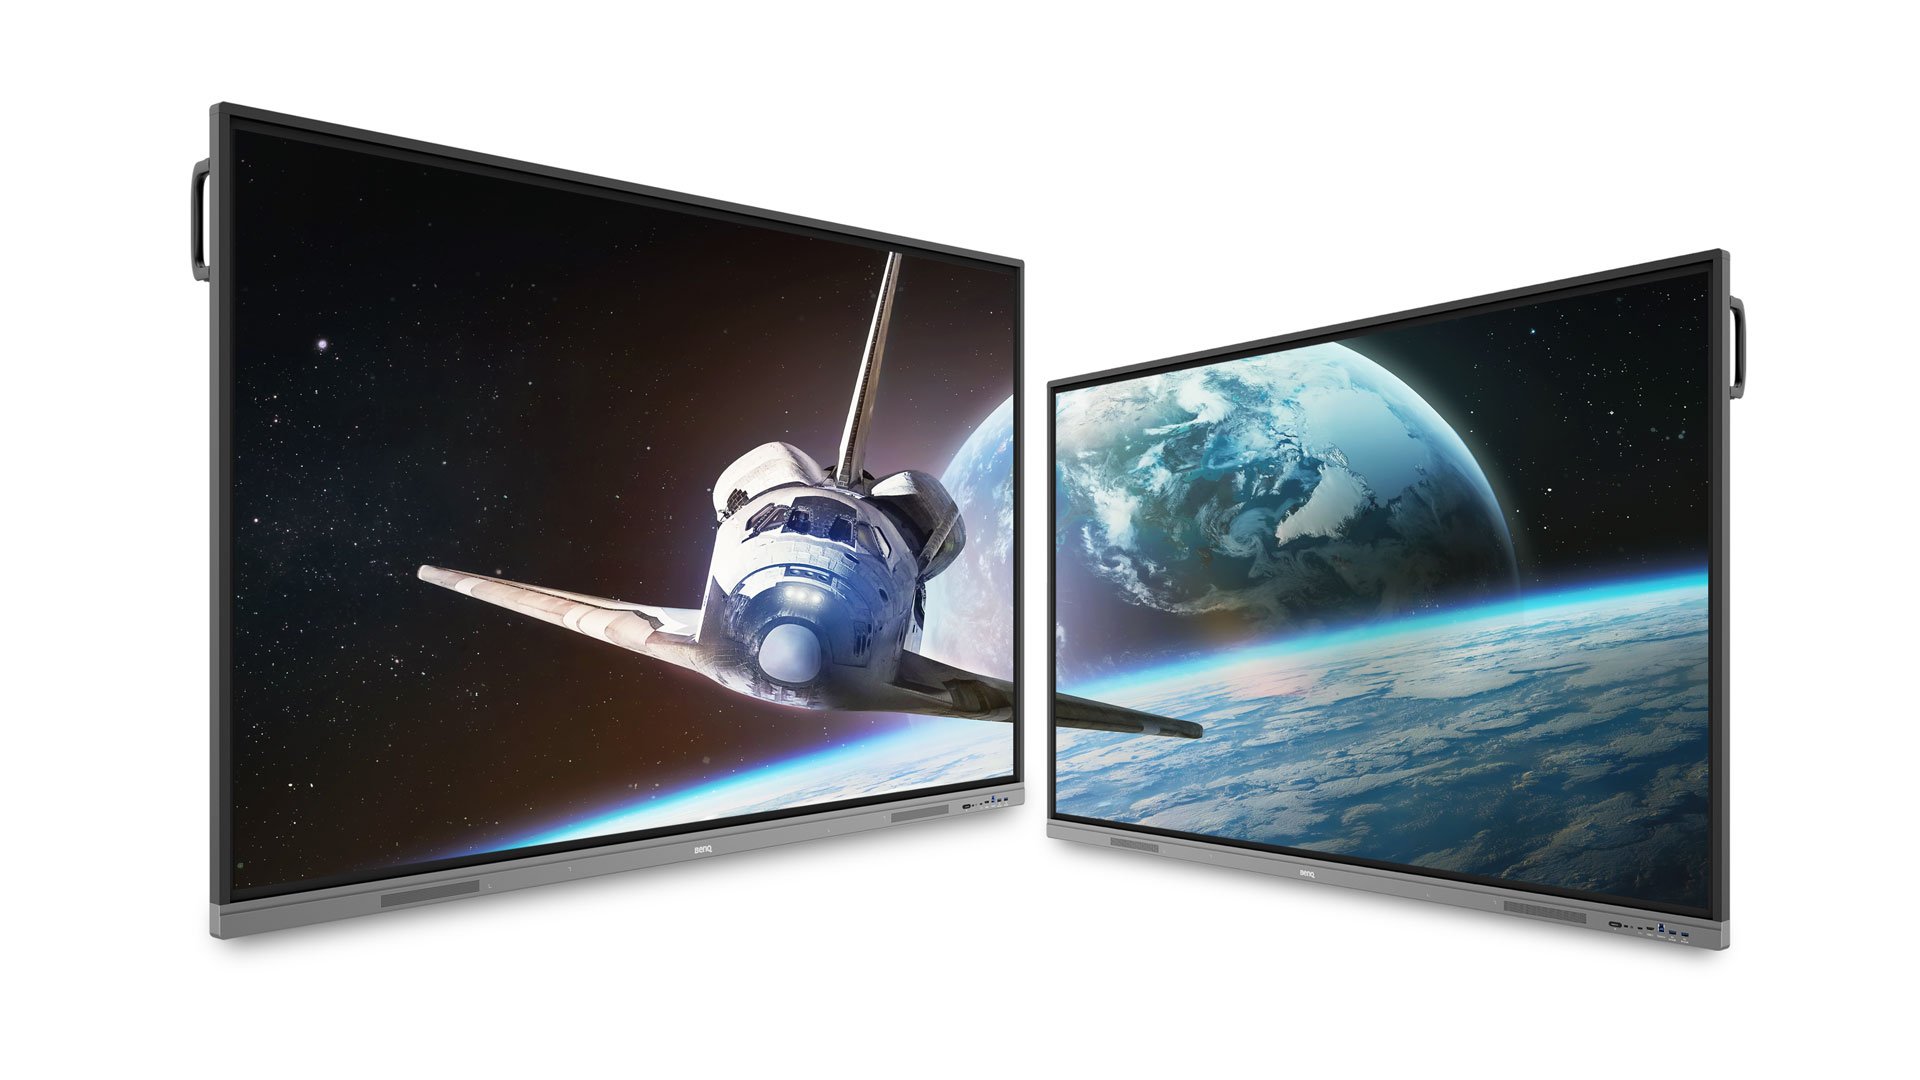 Two side-by-side BenQ Boards showing a space shuttle